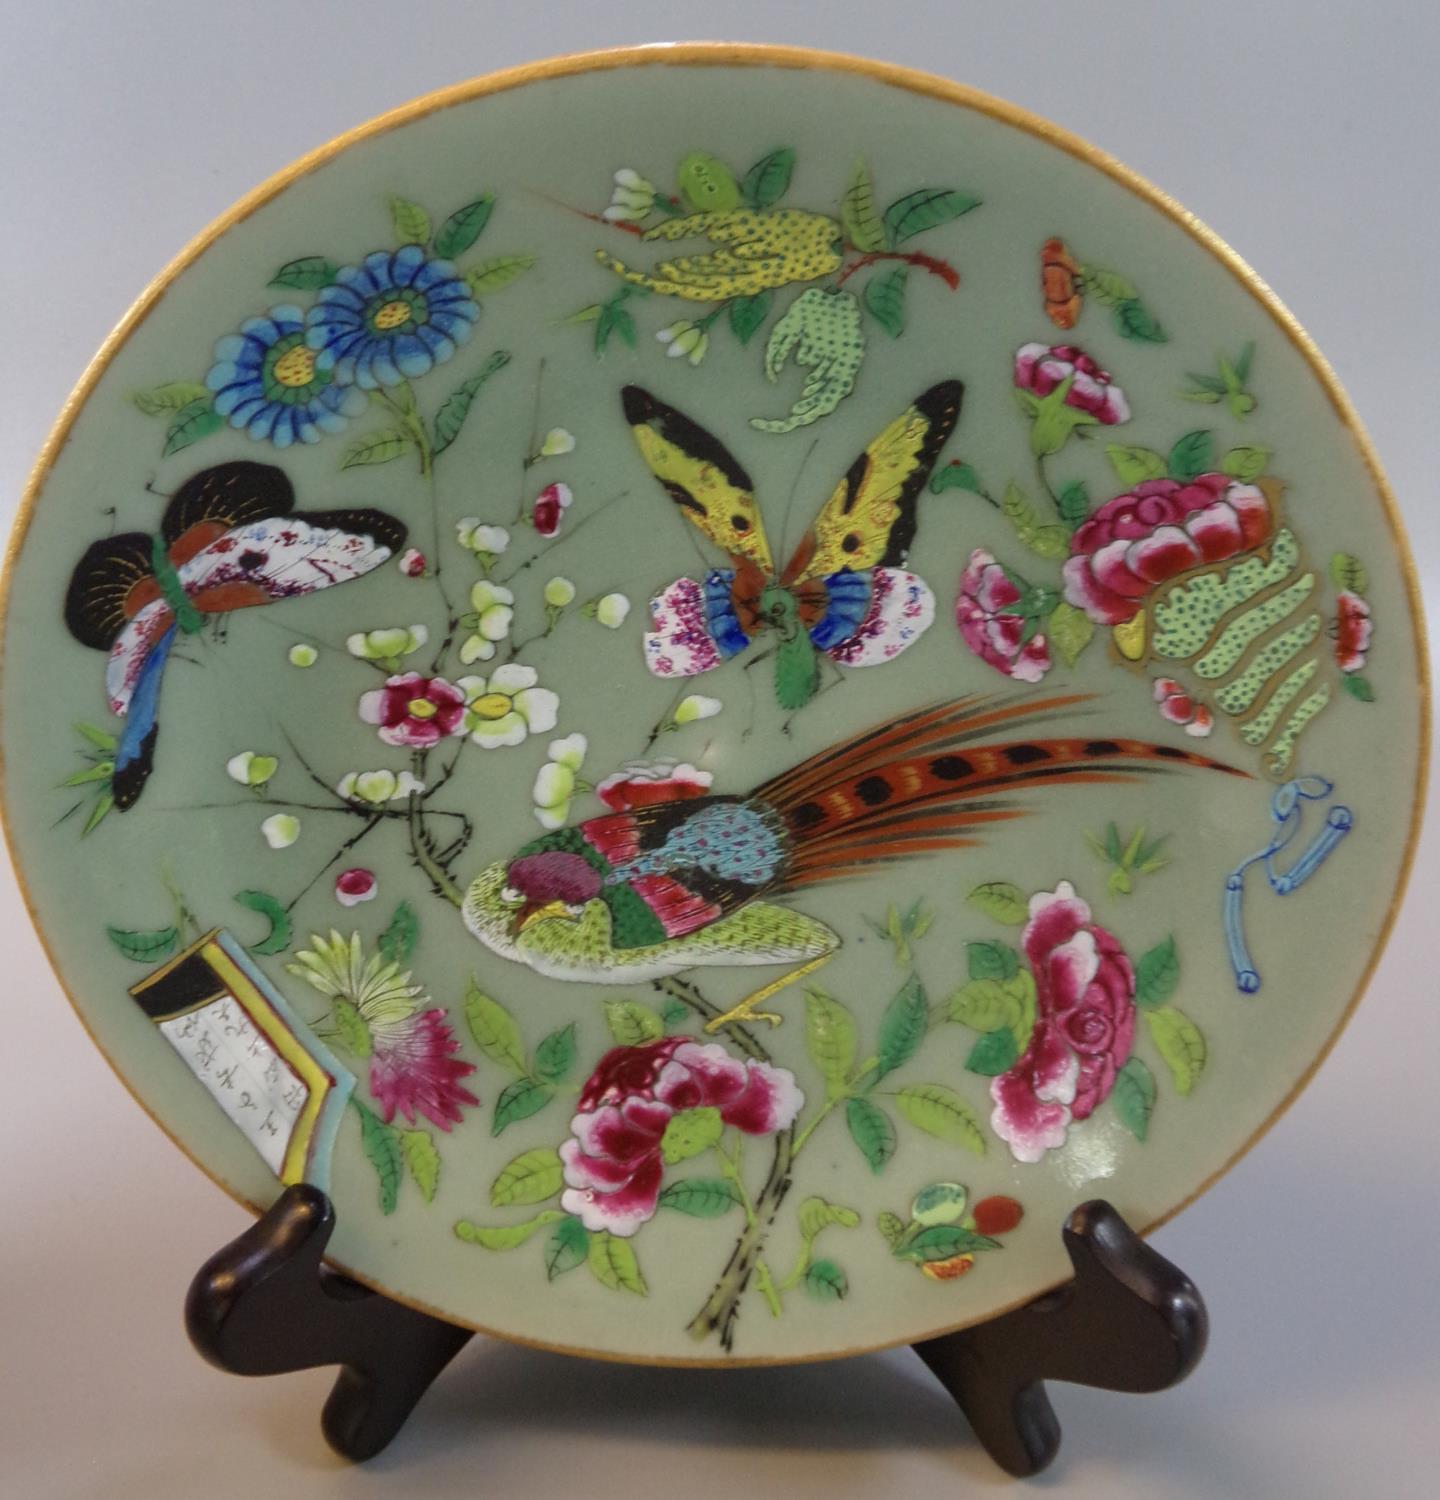 Two similar Chinese porcelain Famille rose dishes on a celadon glaze decorated with birds, - Image 2 of 5